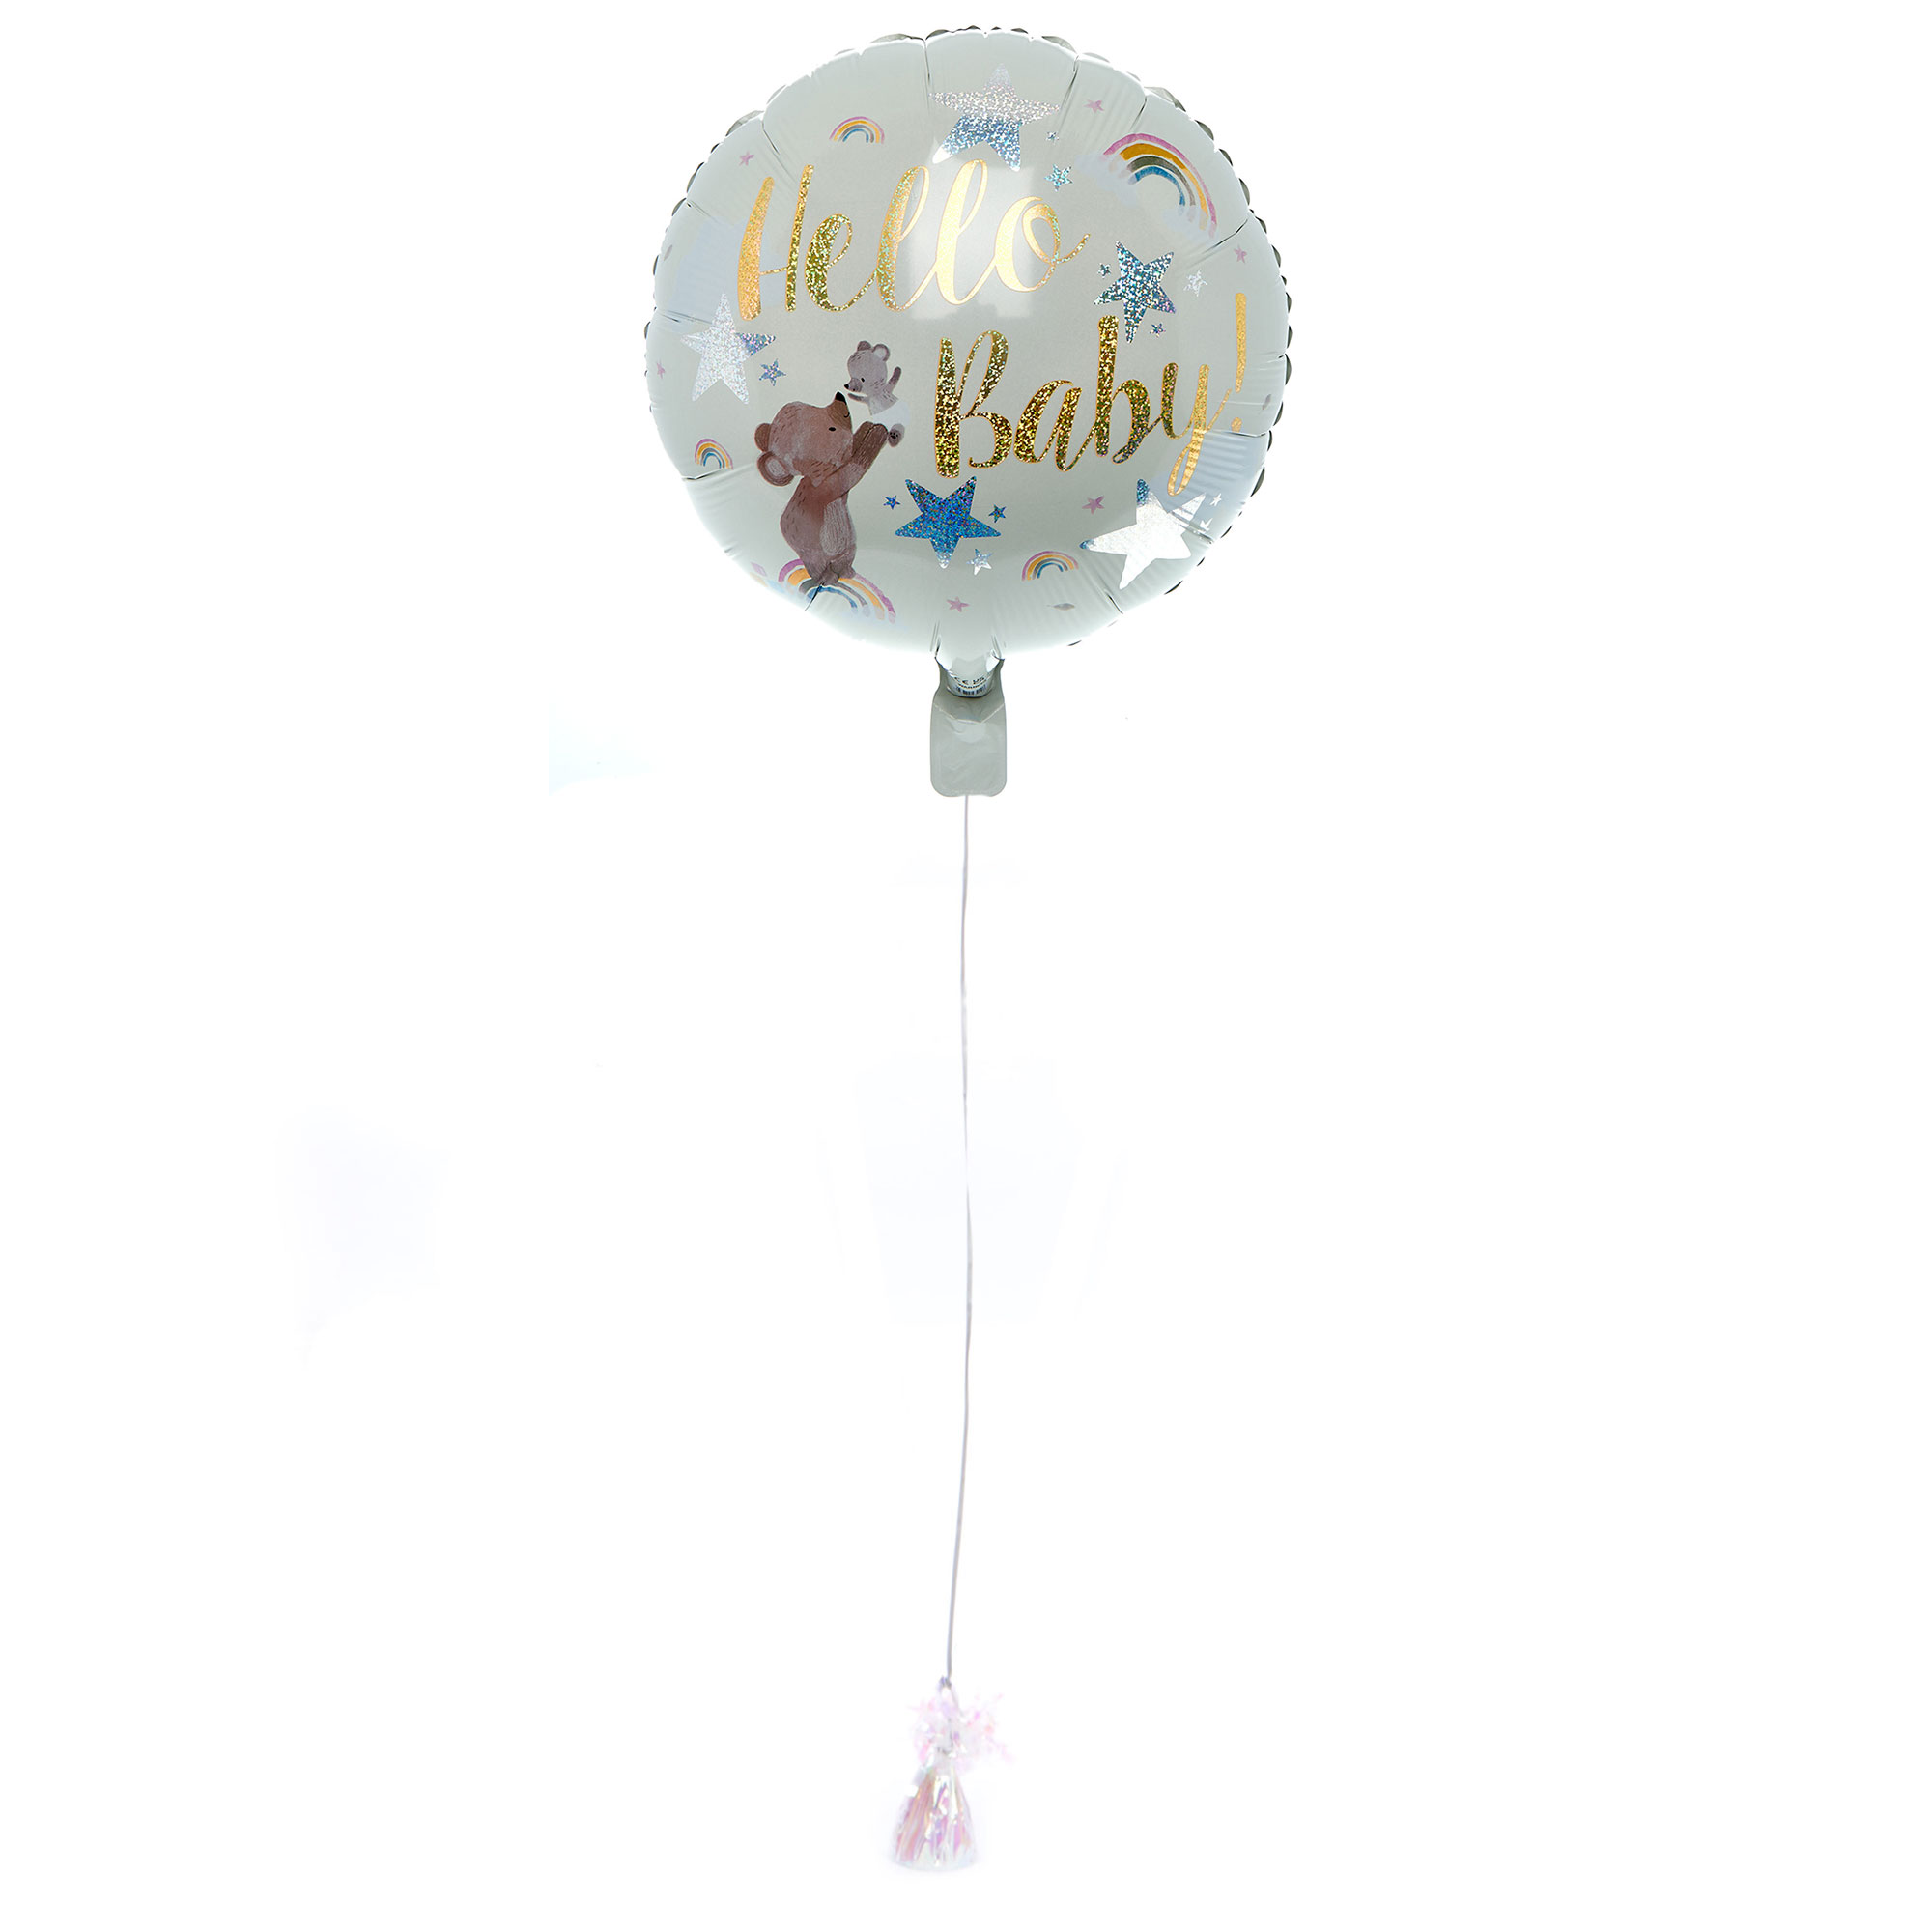 Hello Baby Balloon & Lindt Chocolate Box - FREE GIFT CARD!